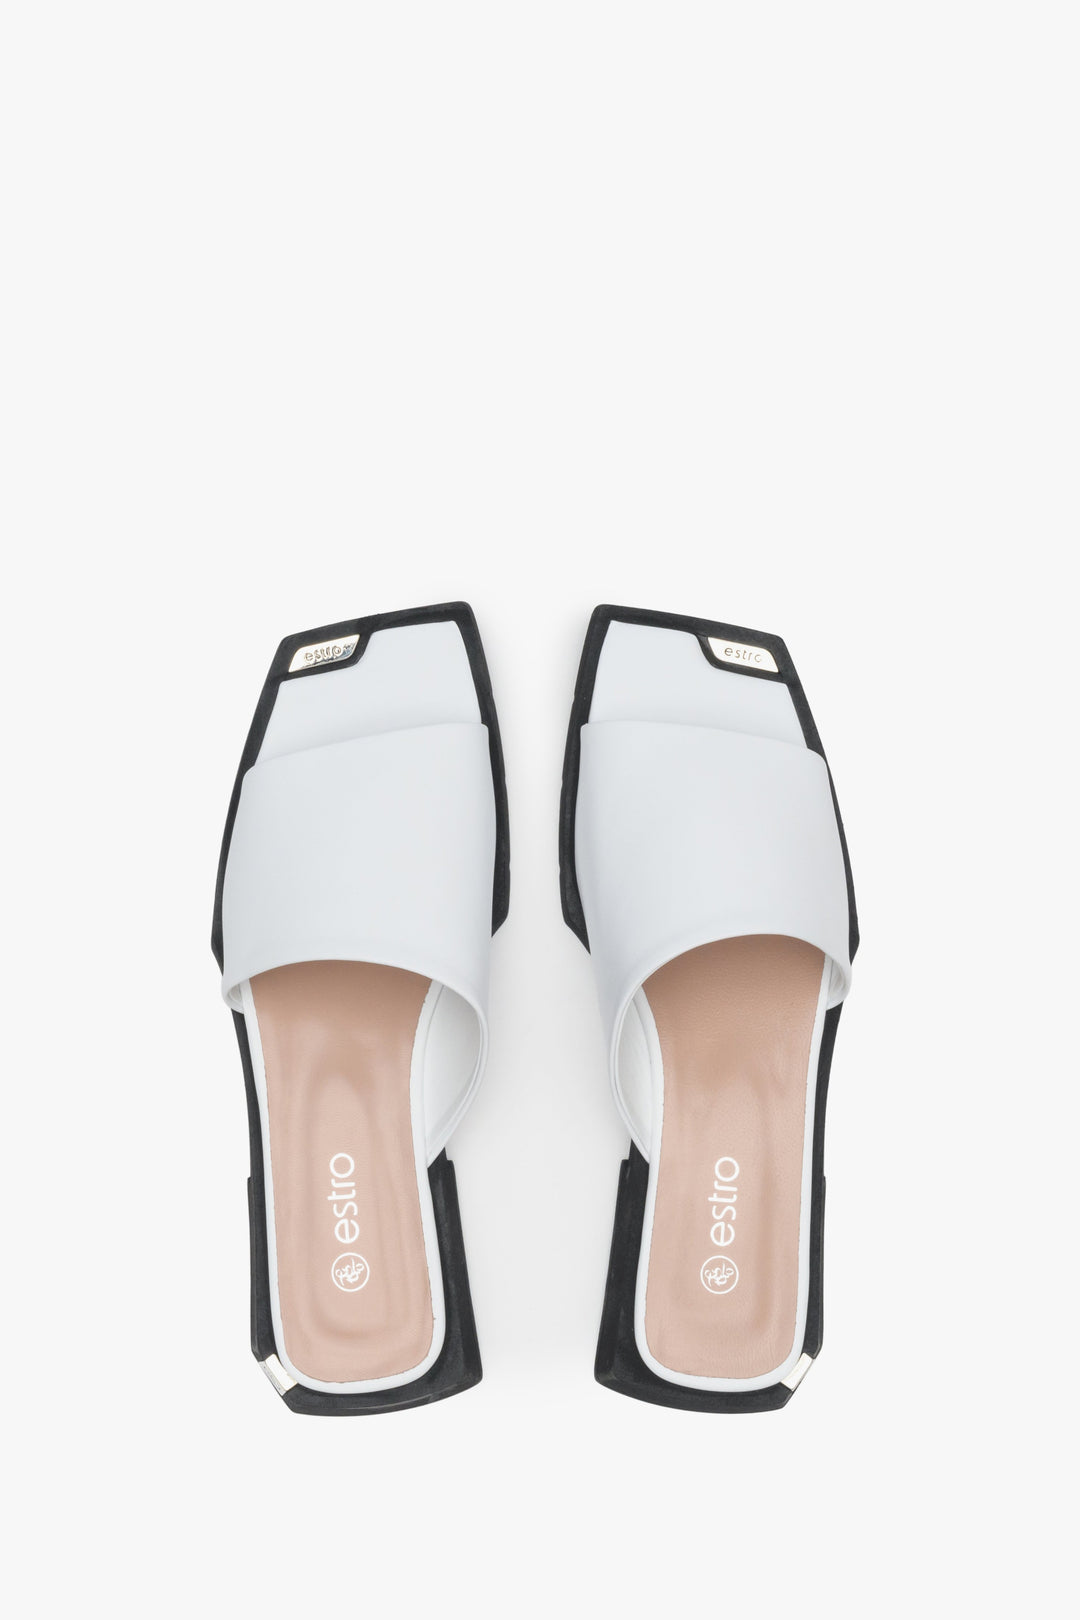 Women's leather mules for summer in white - presentation of the back of the model.